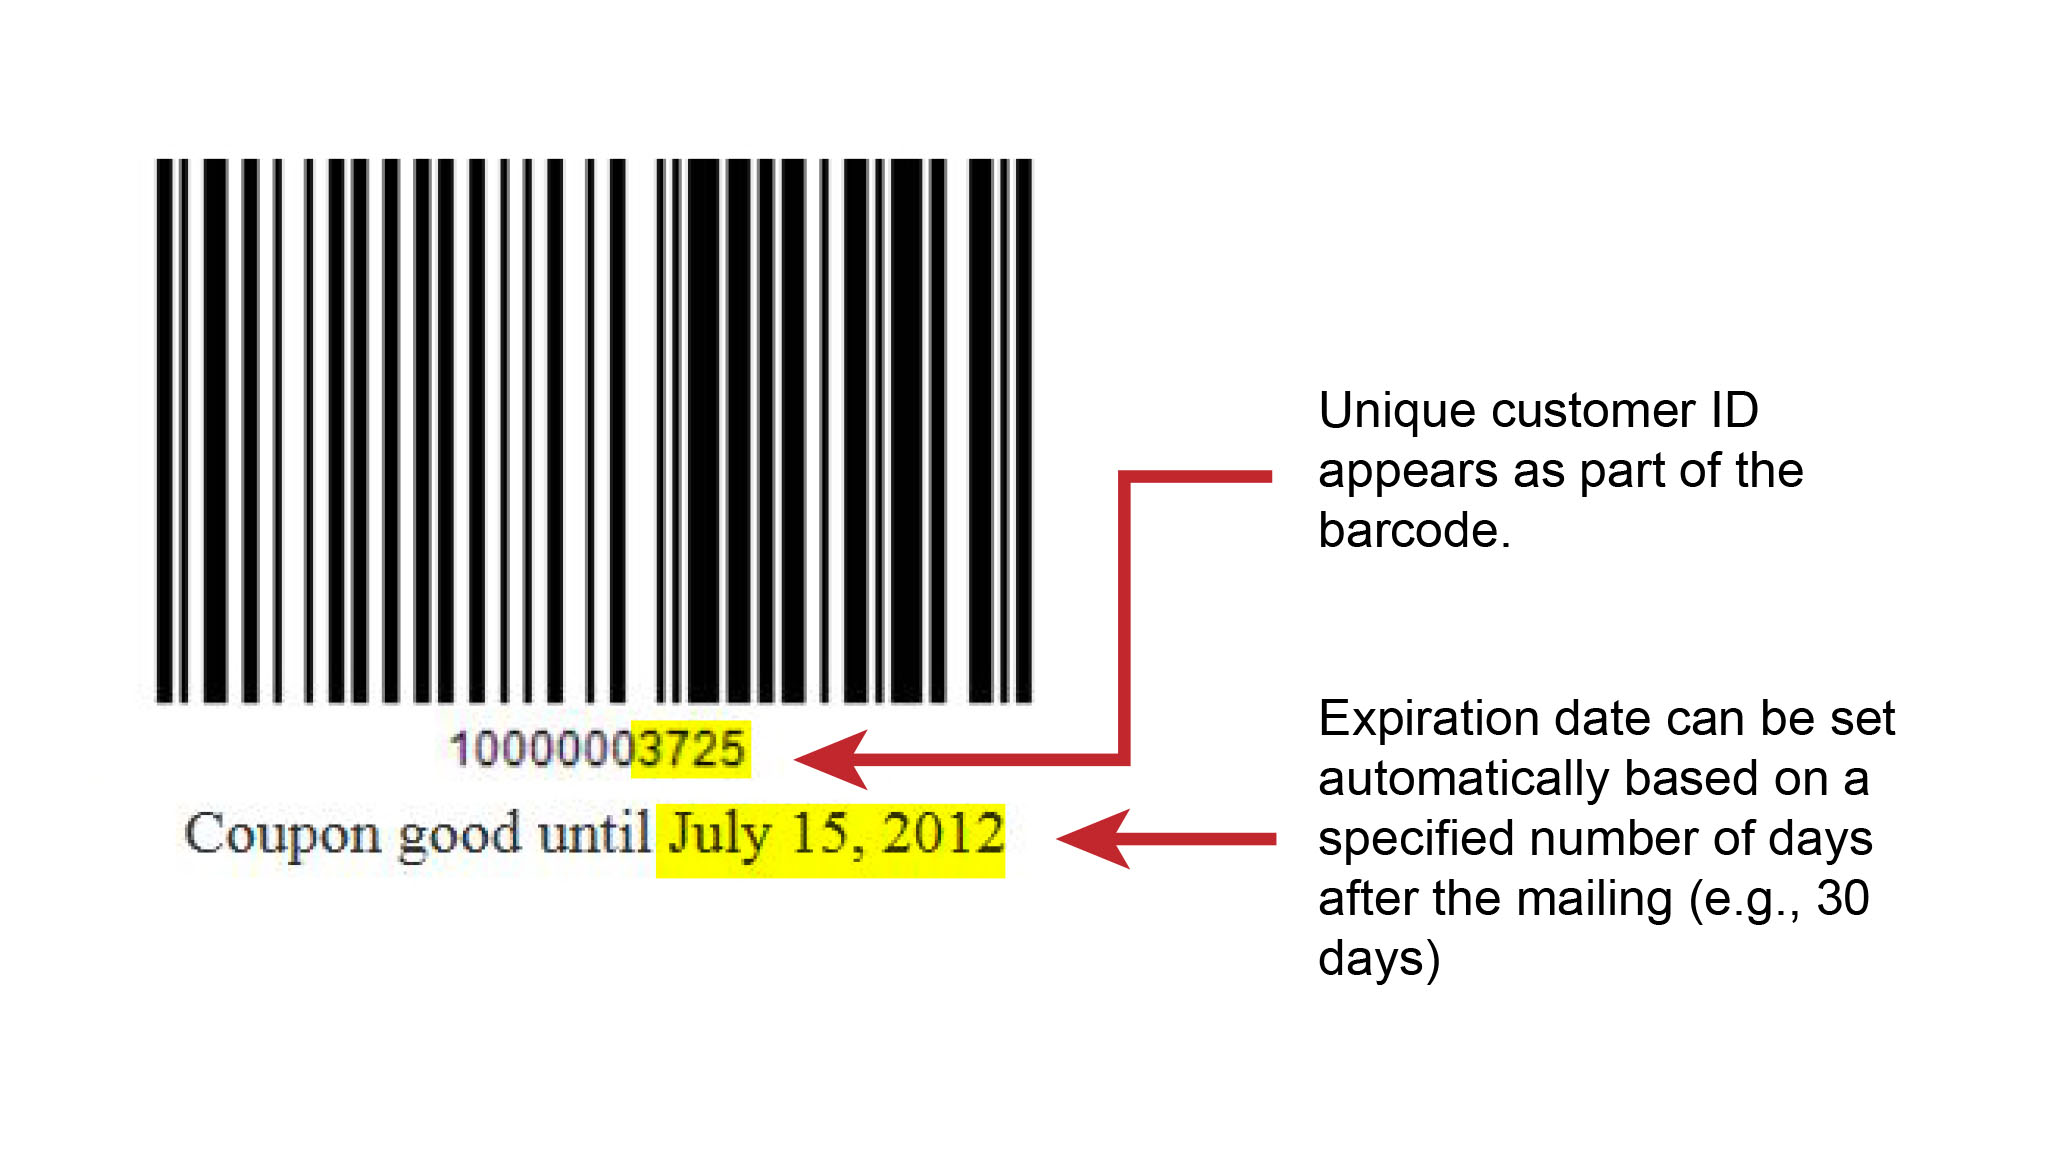 Example showing dynamic barcode